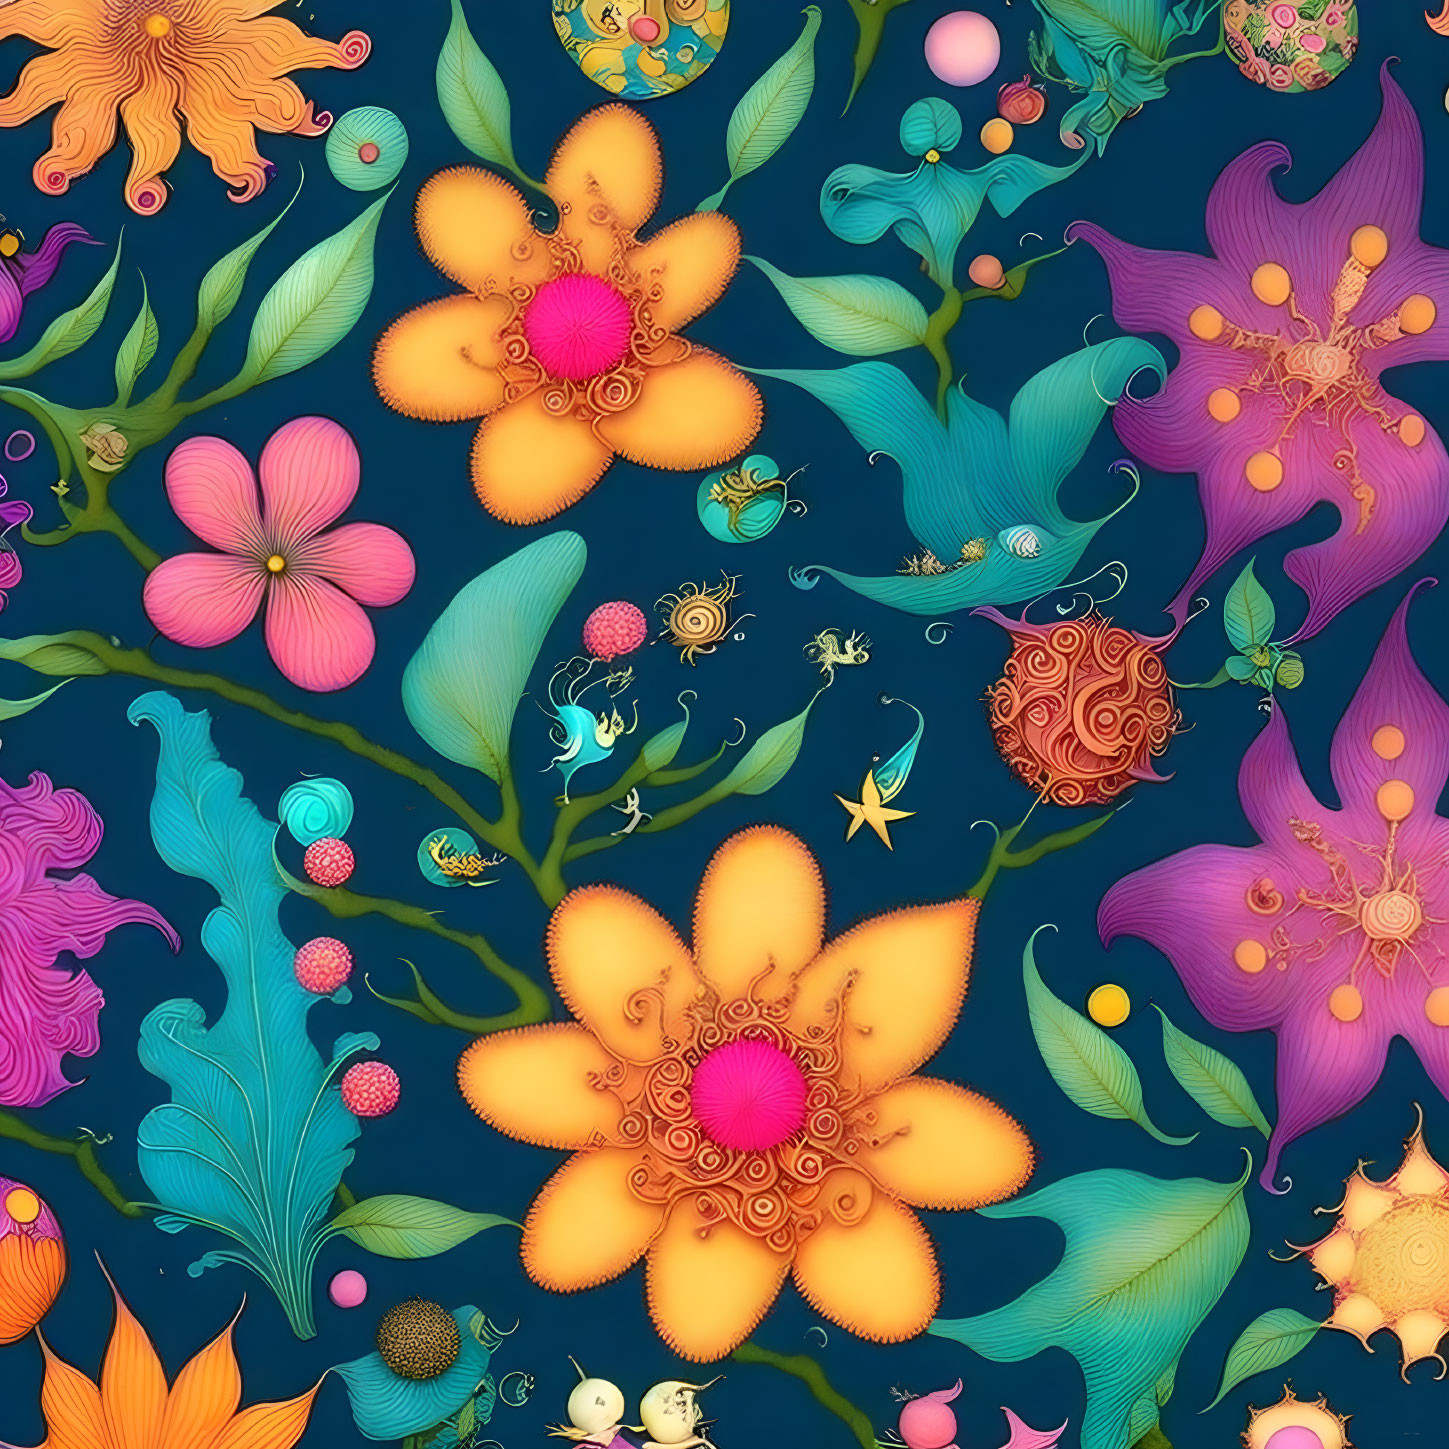 Whimsical flowers and sea creatures in vibrant digital art